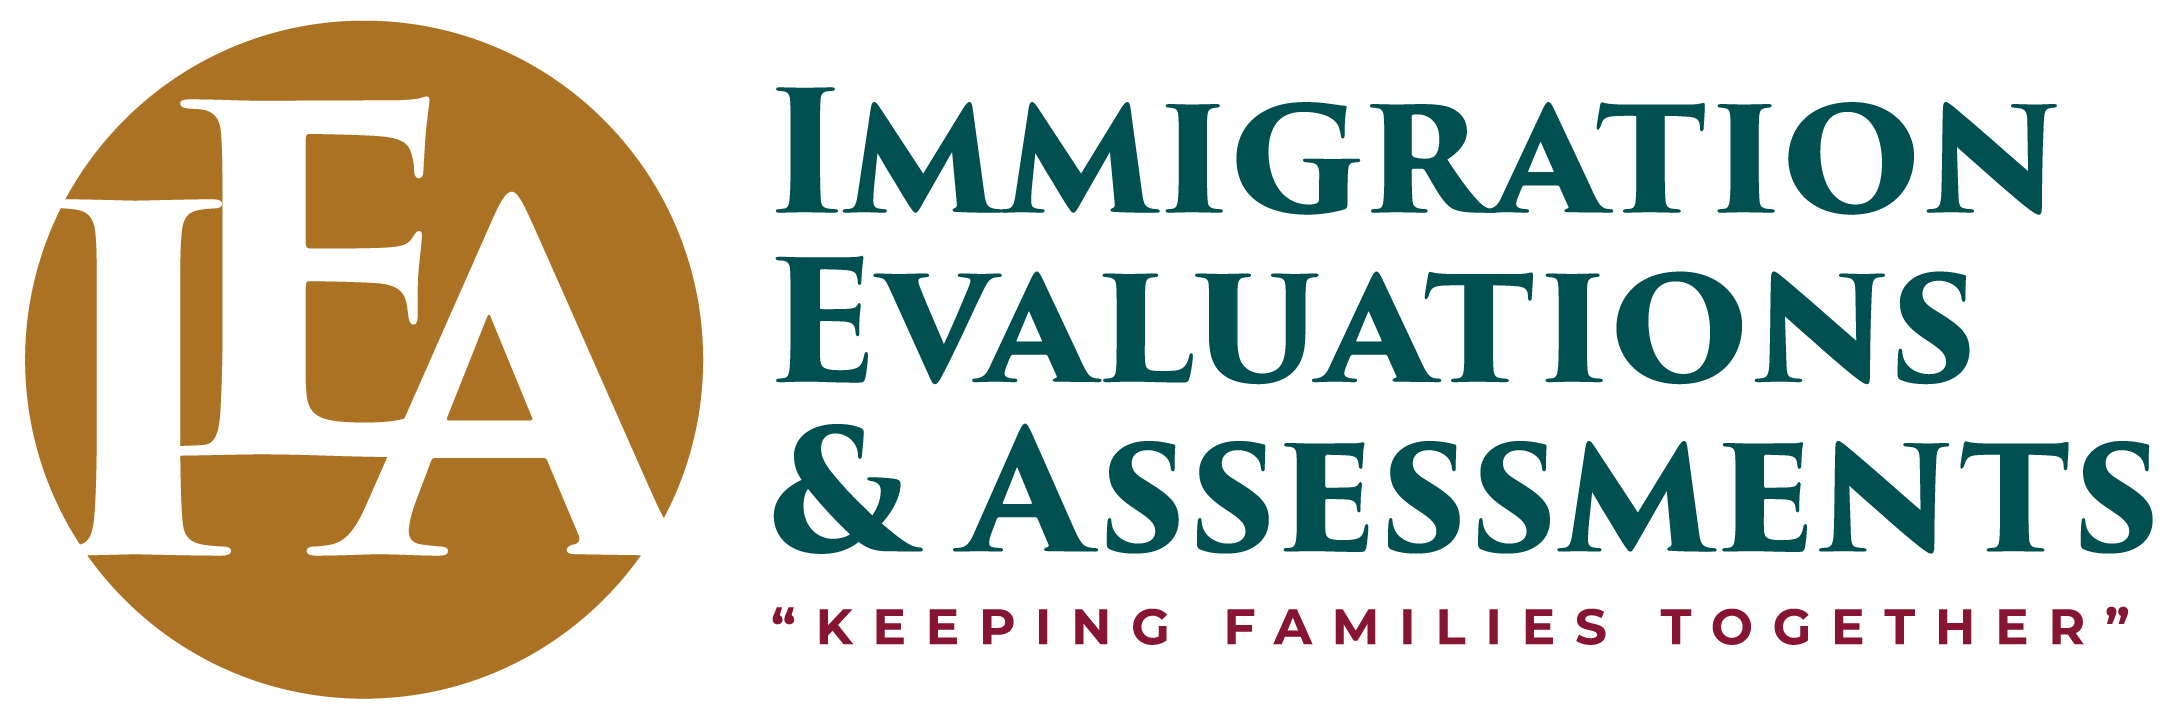 Immigration Evaluations & Assessments